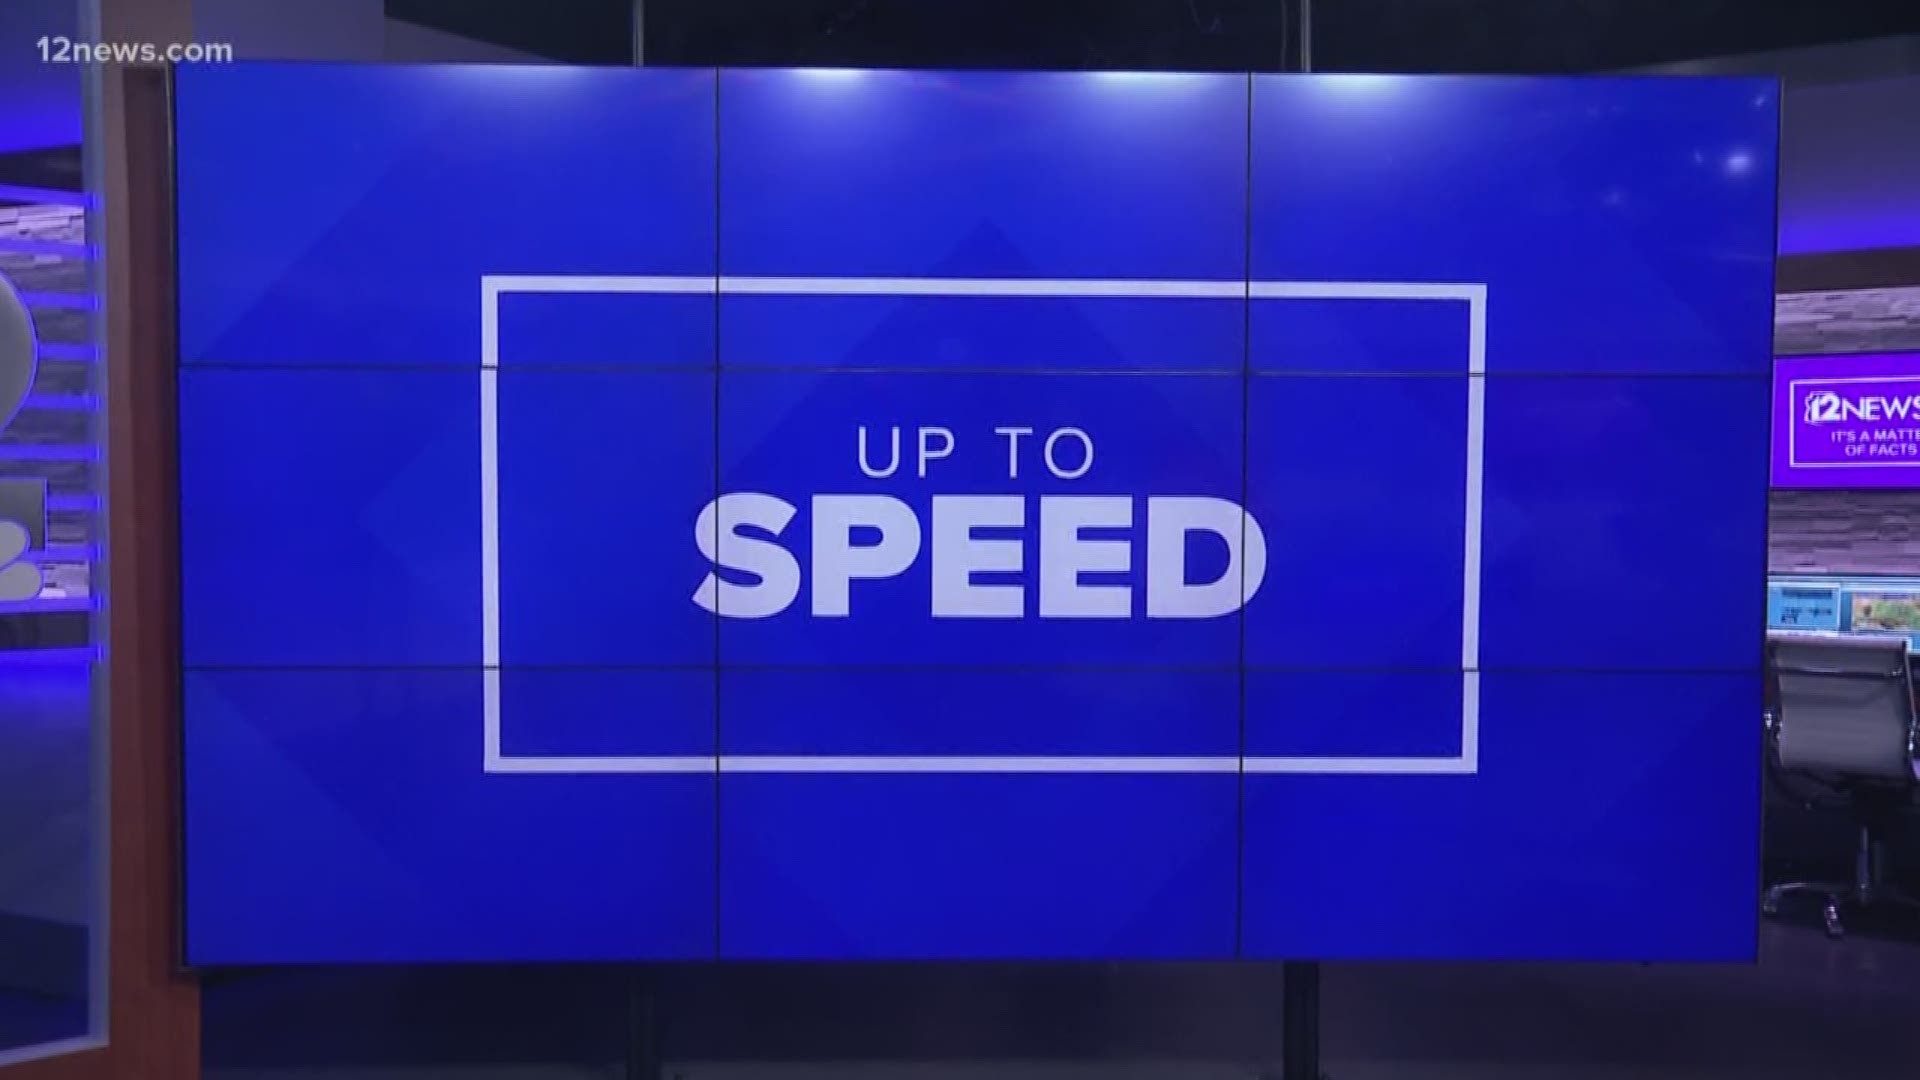 We get you "Up to Speed" on the latest news happening around the Valley and across the nation on Wednesday afternoon.